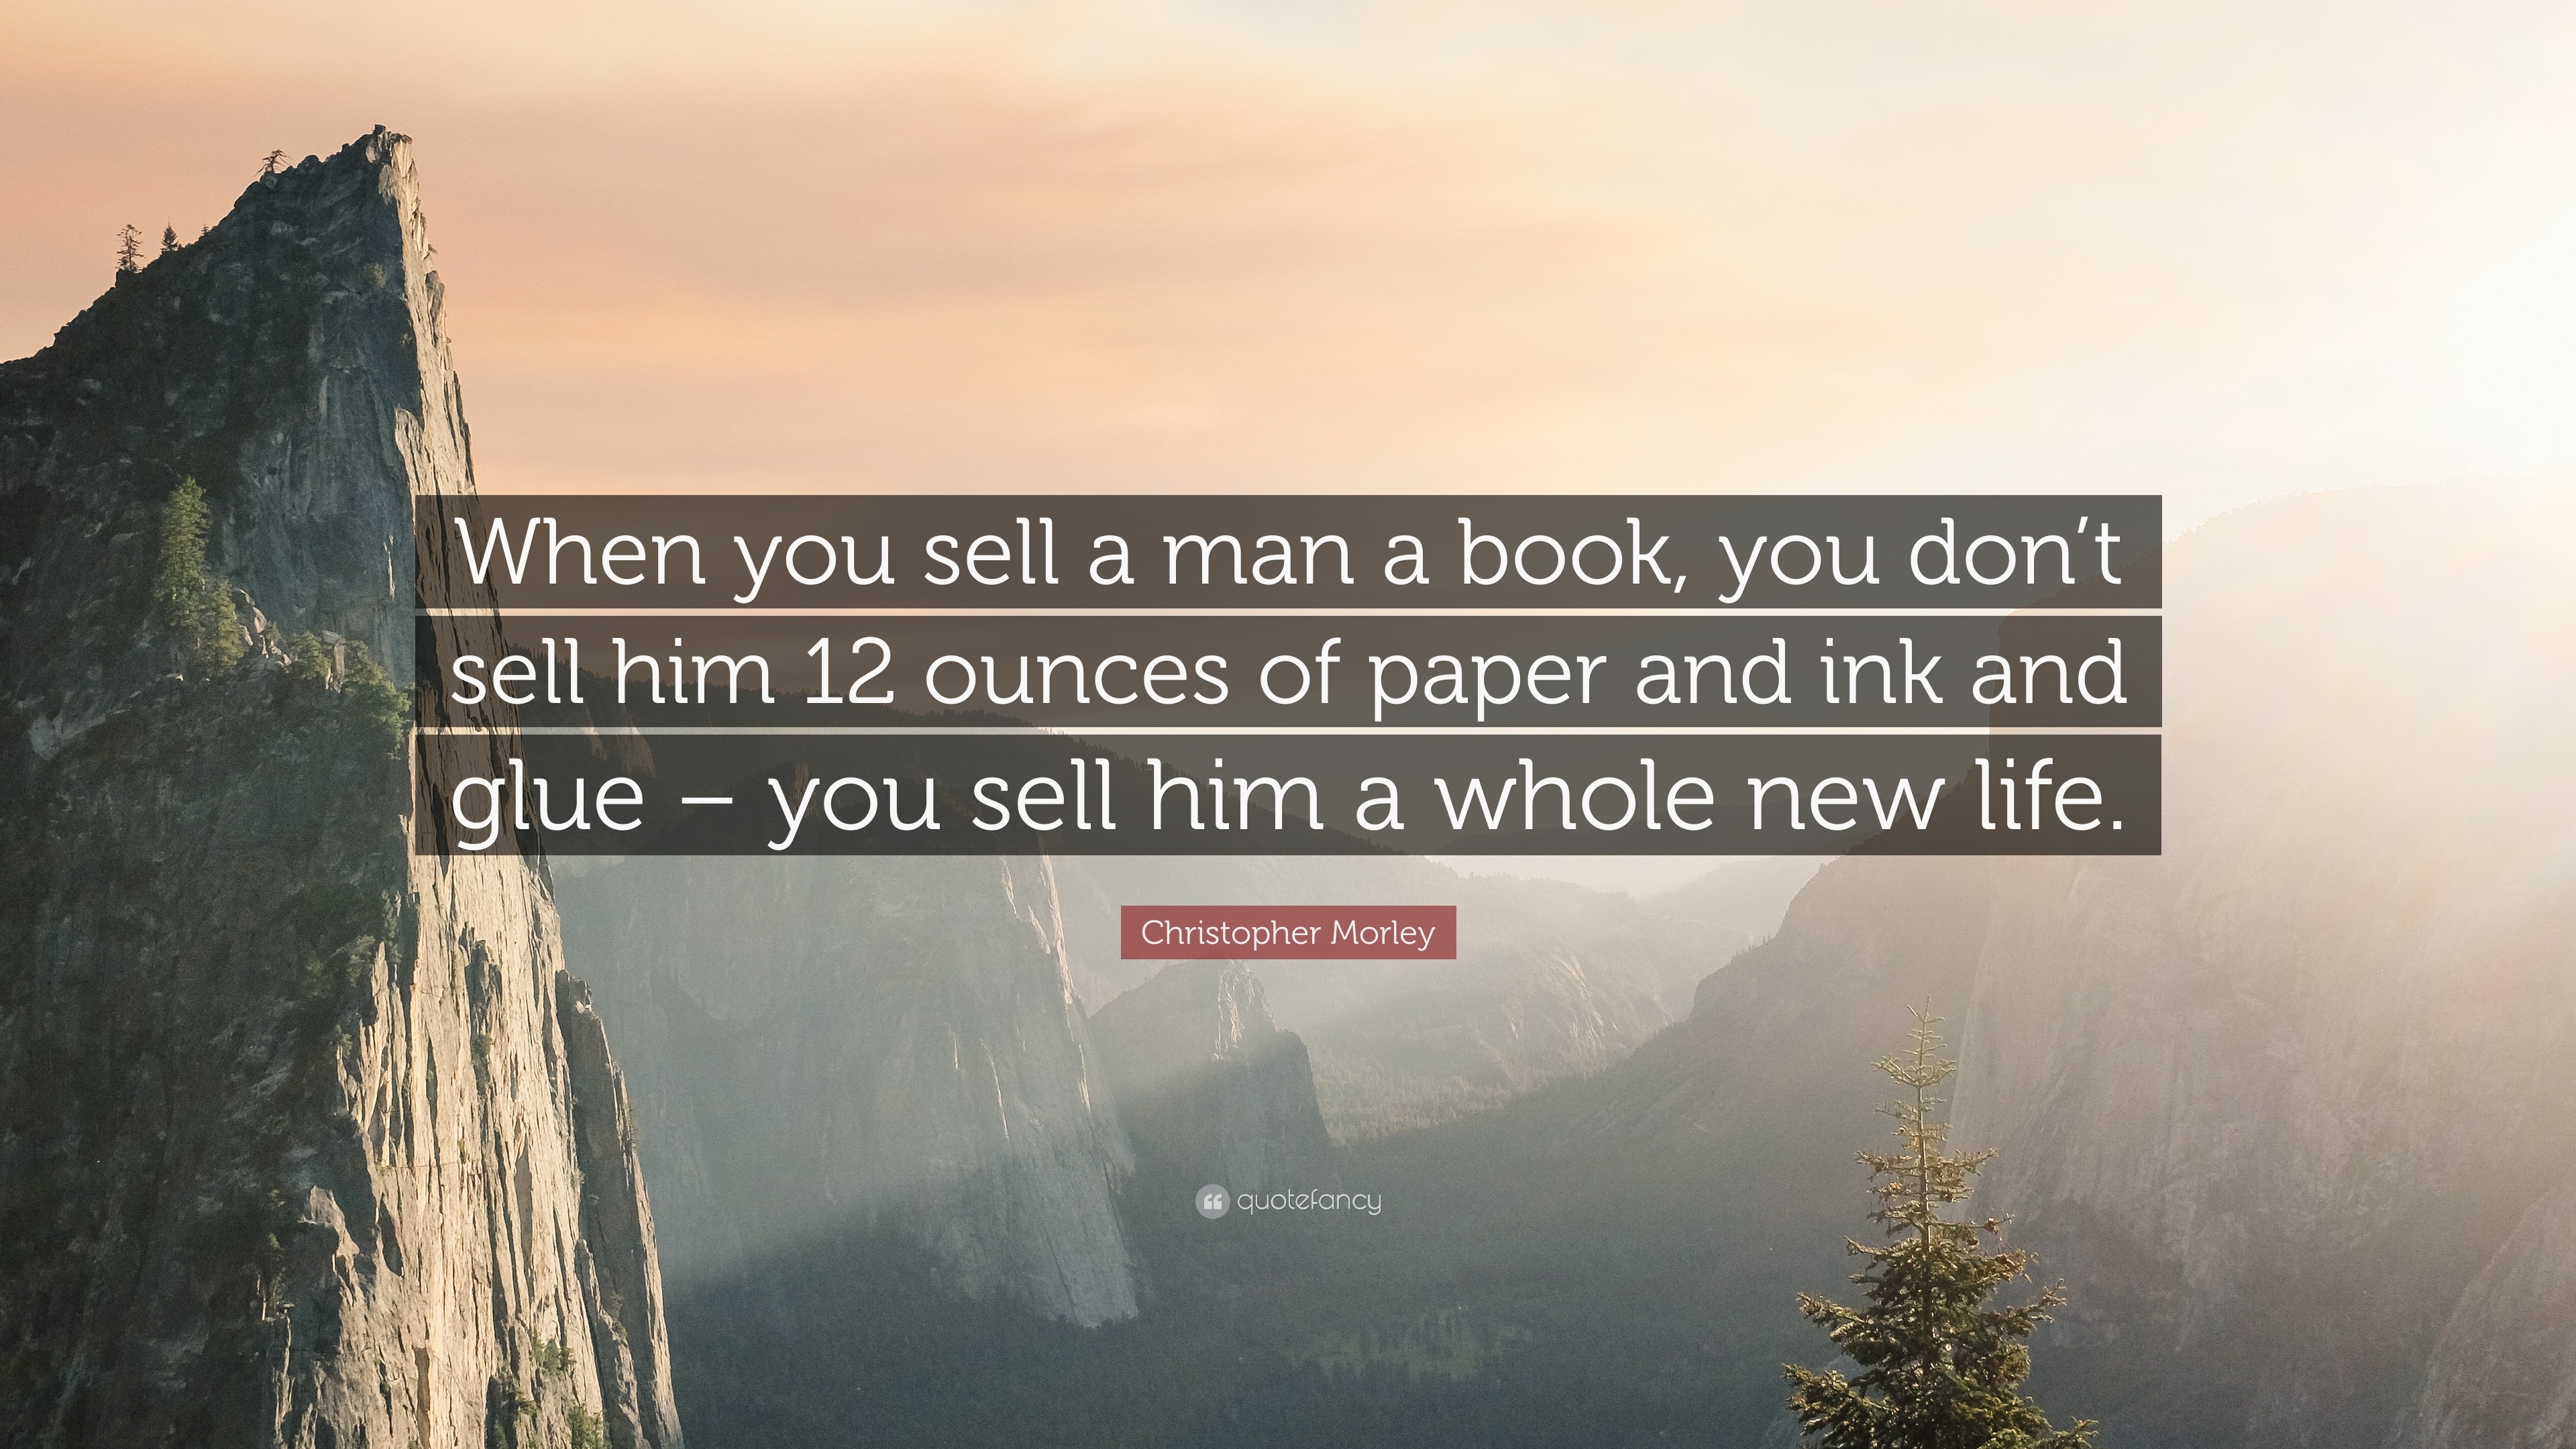 3840x2160 Christopher Morley Quote: “When you sell a man a book, you don'